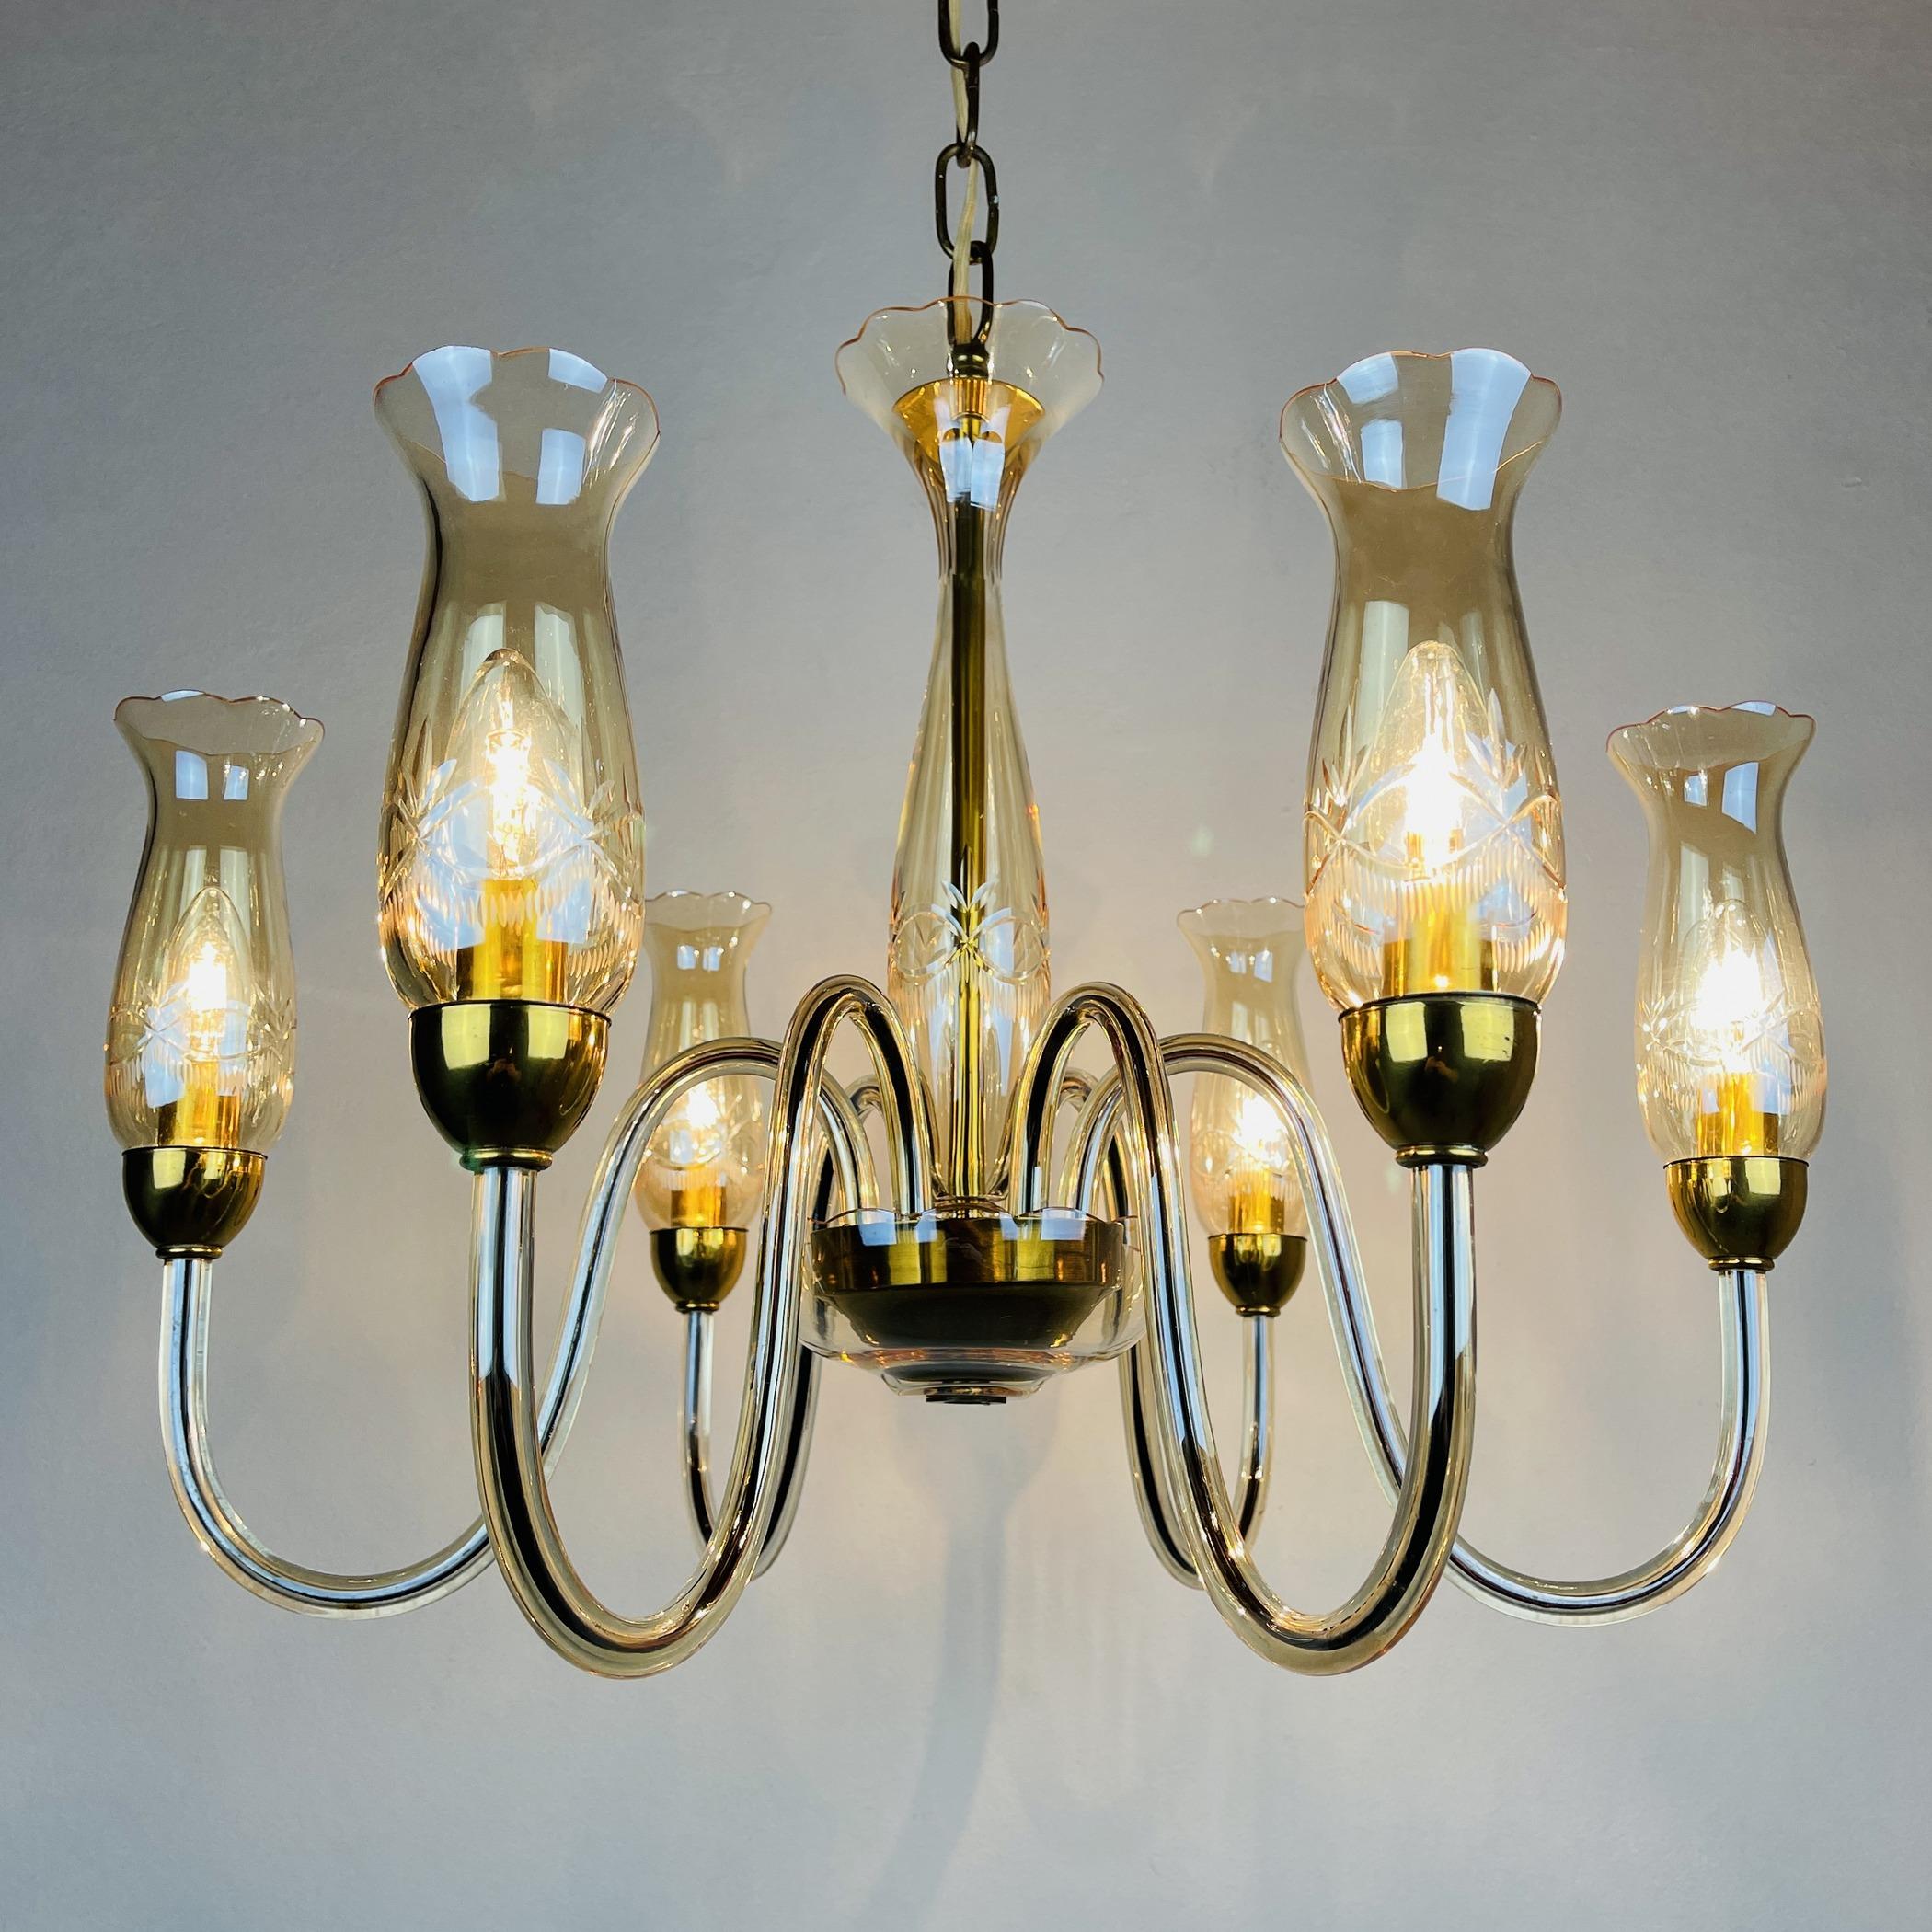 Incredibly beautiful rare Murano glass chandelier.
The mid-century chandelier was made in Italy by De Majo in the 1970s.
Vintage chandelier made entirely of glass with small brass fittings. In very good condition. No cracks and chips. The wiring